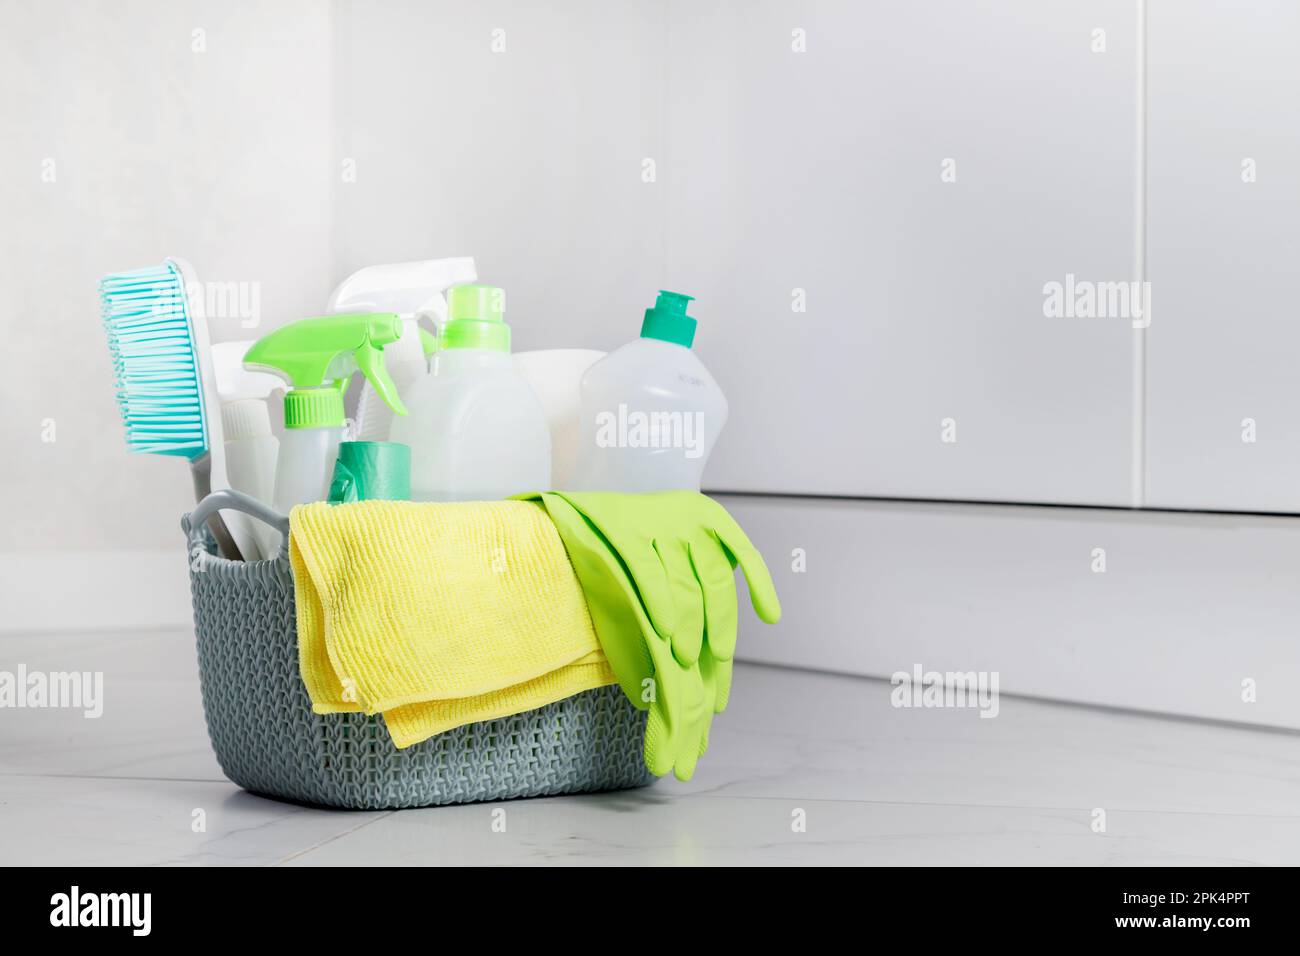 Cleaning ecological chemical products for cleaning, detergent bottles, disinfection at home in a basket on tile floor in light interior Stock Photo